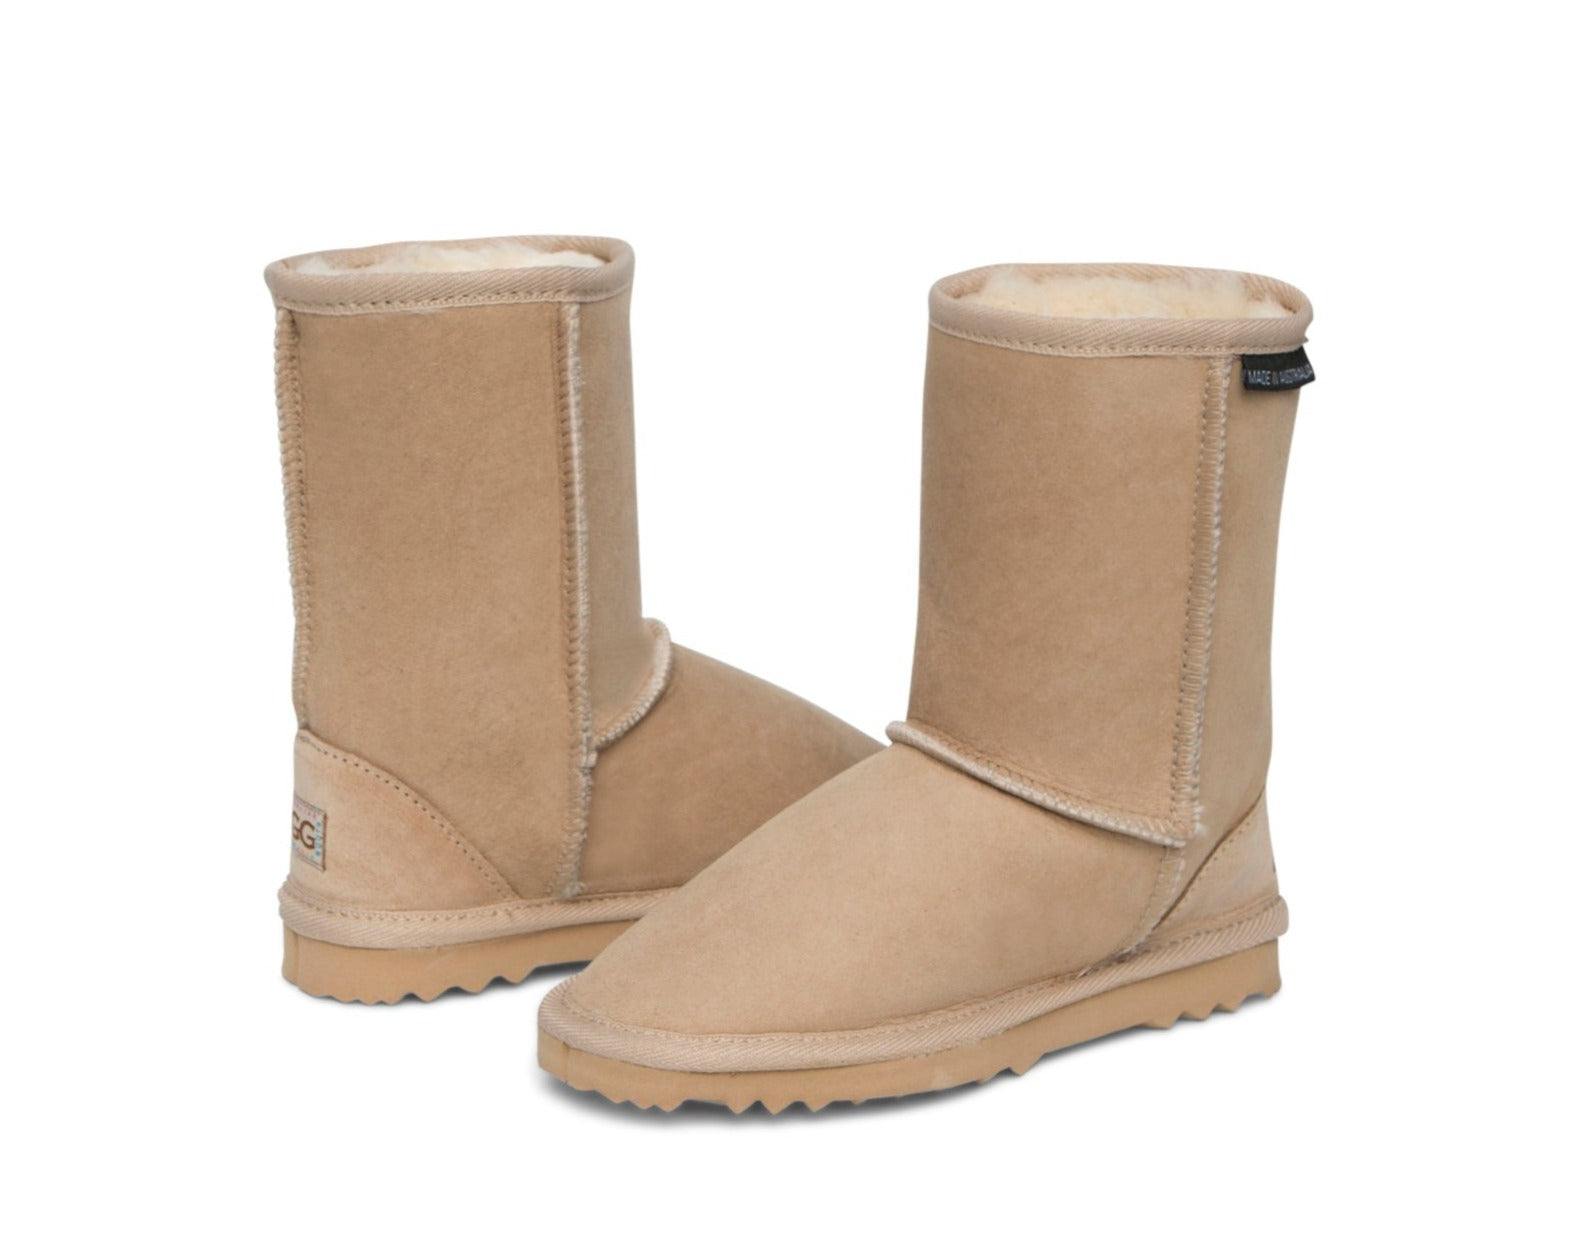 Kid's Classic Ugg Boots in Sand colour